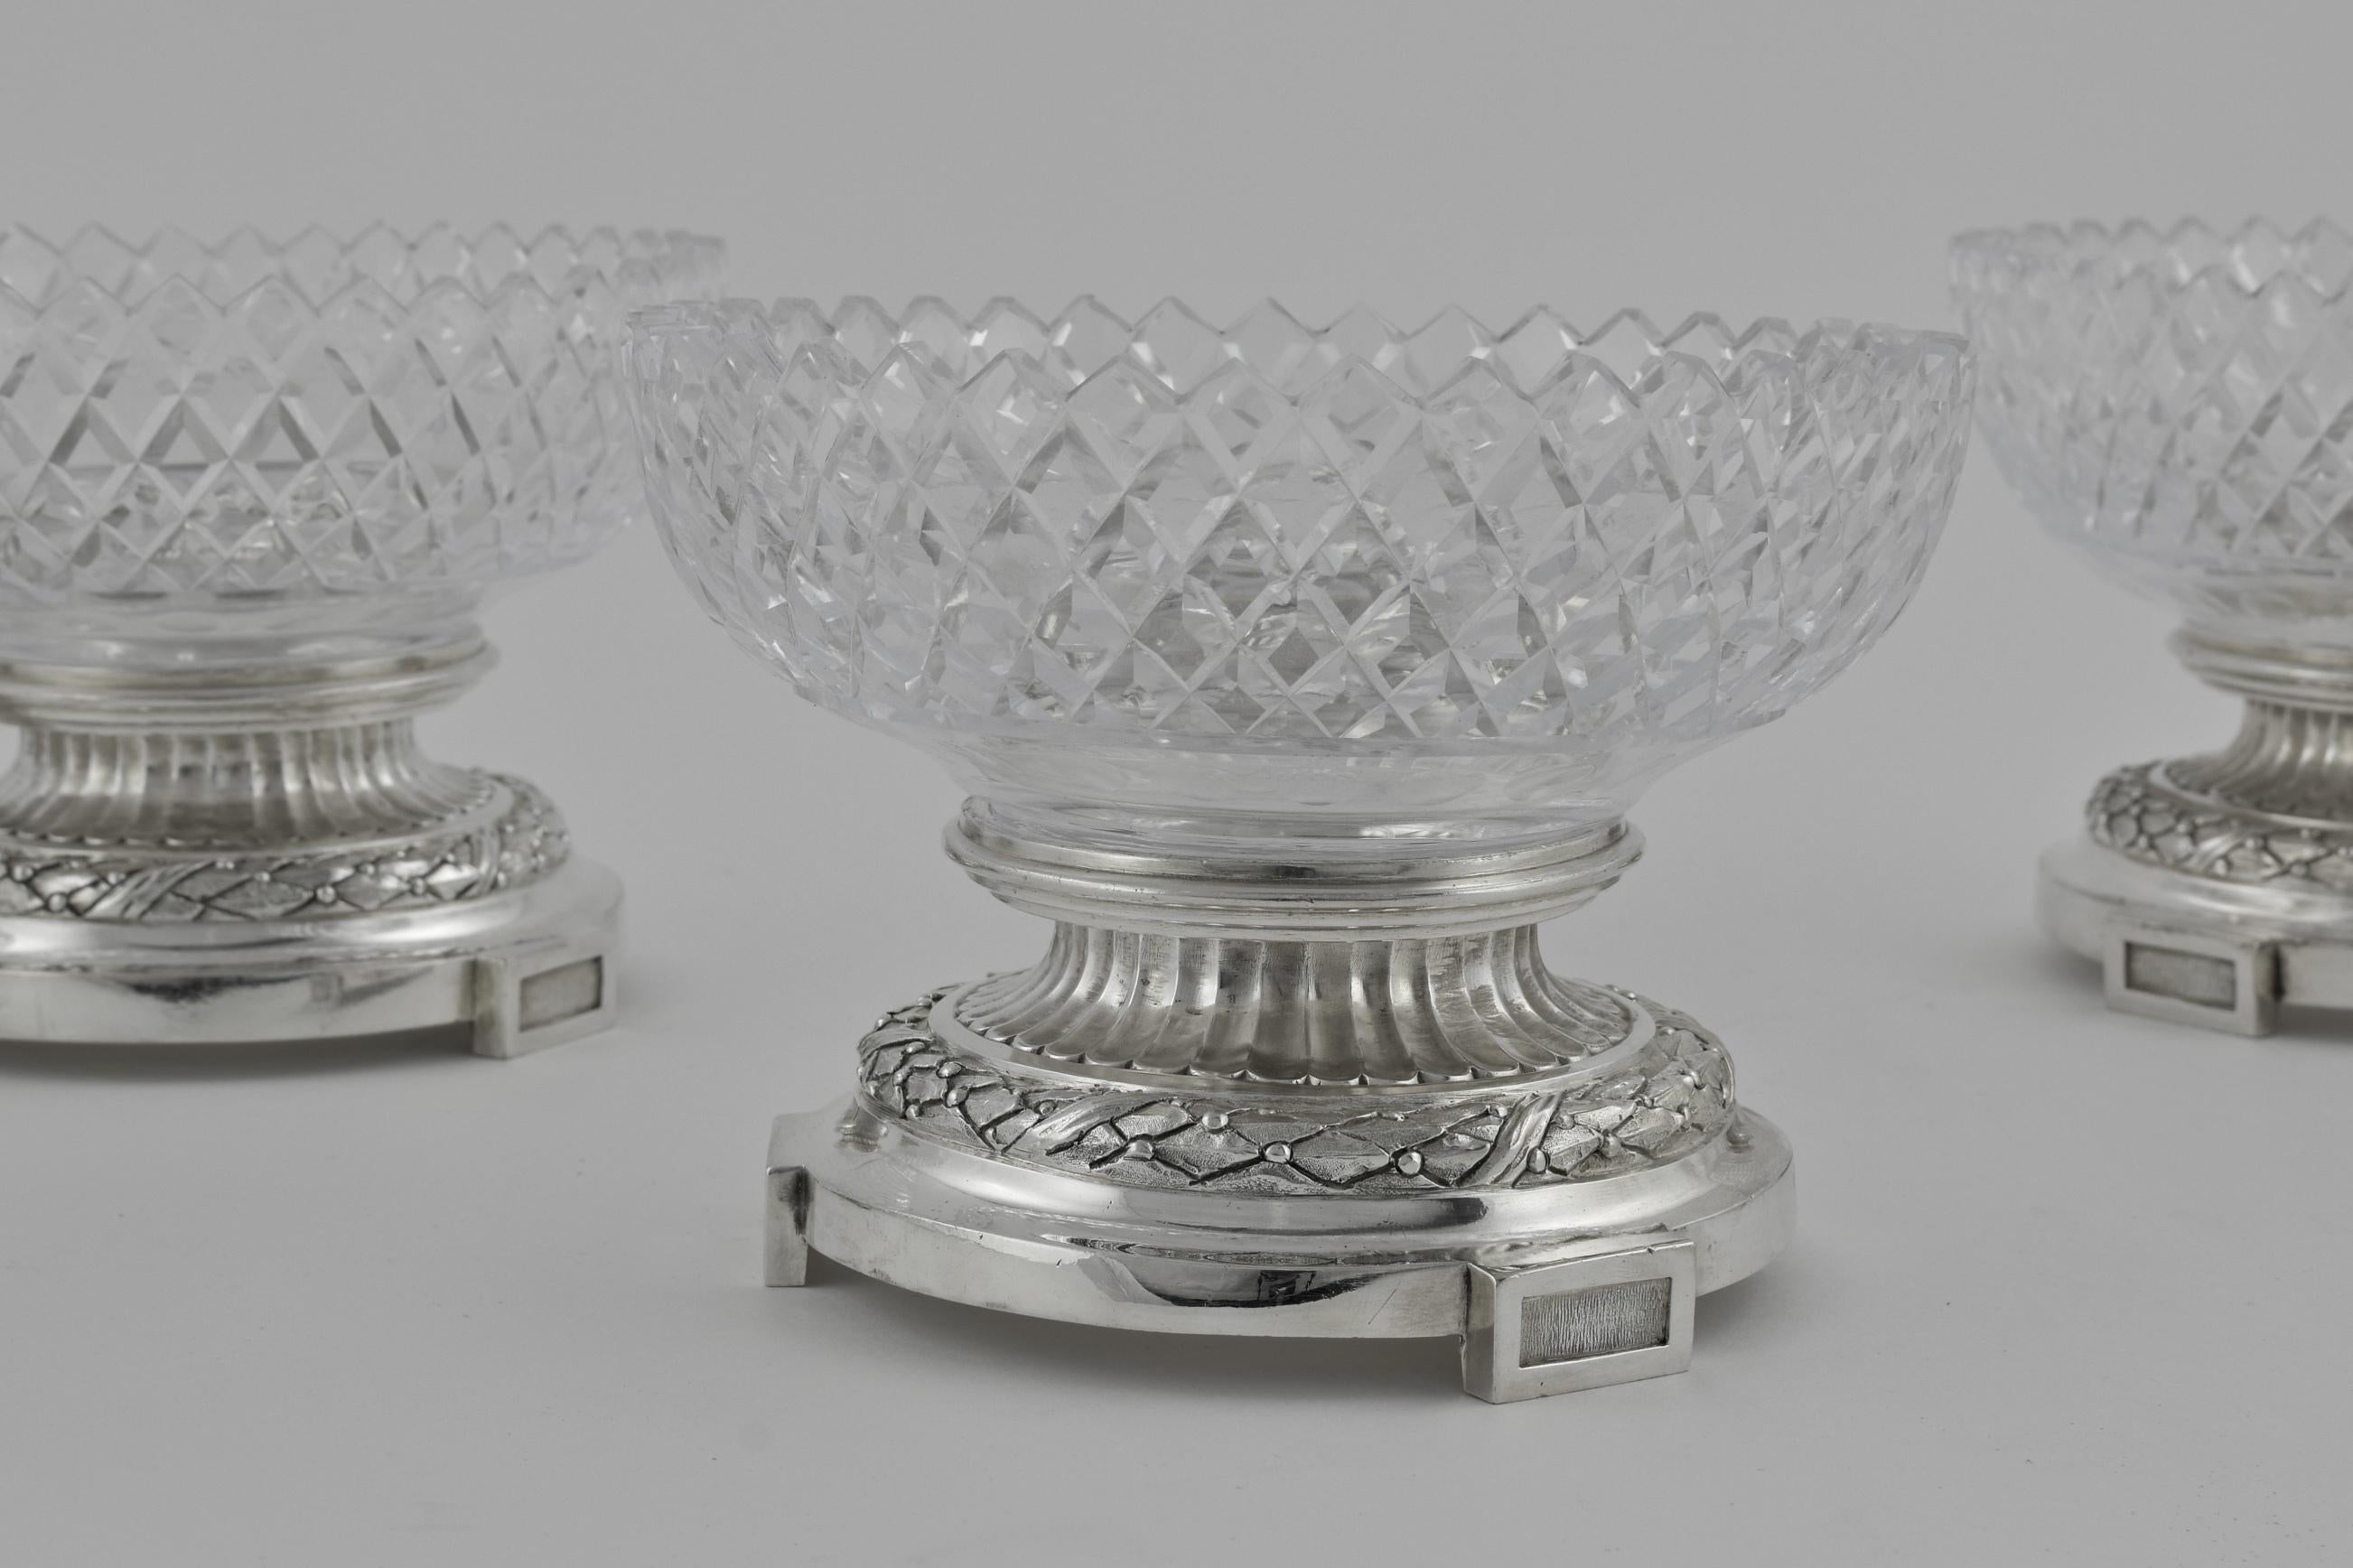 Excellent quality circular form set of 4 dessert stand comports. Classically styled with fluted decoration and cross cut glass bowls.